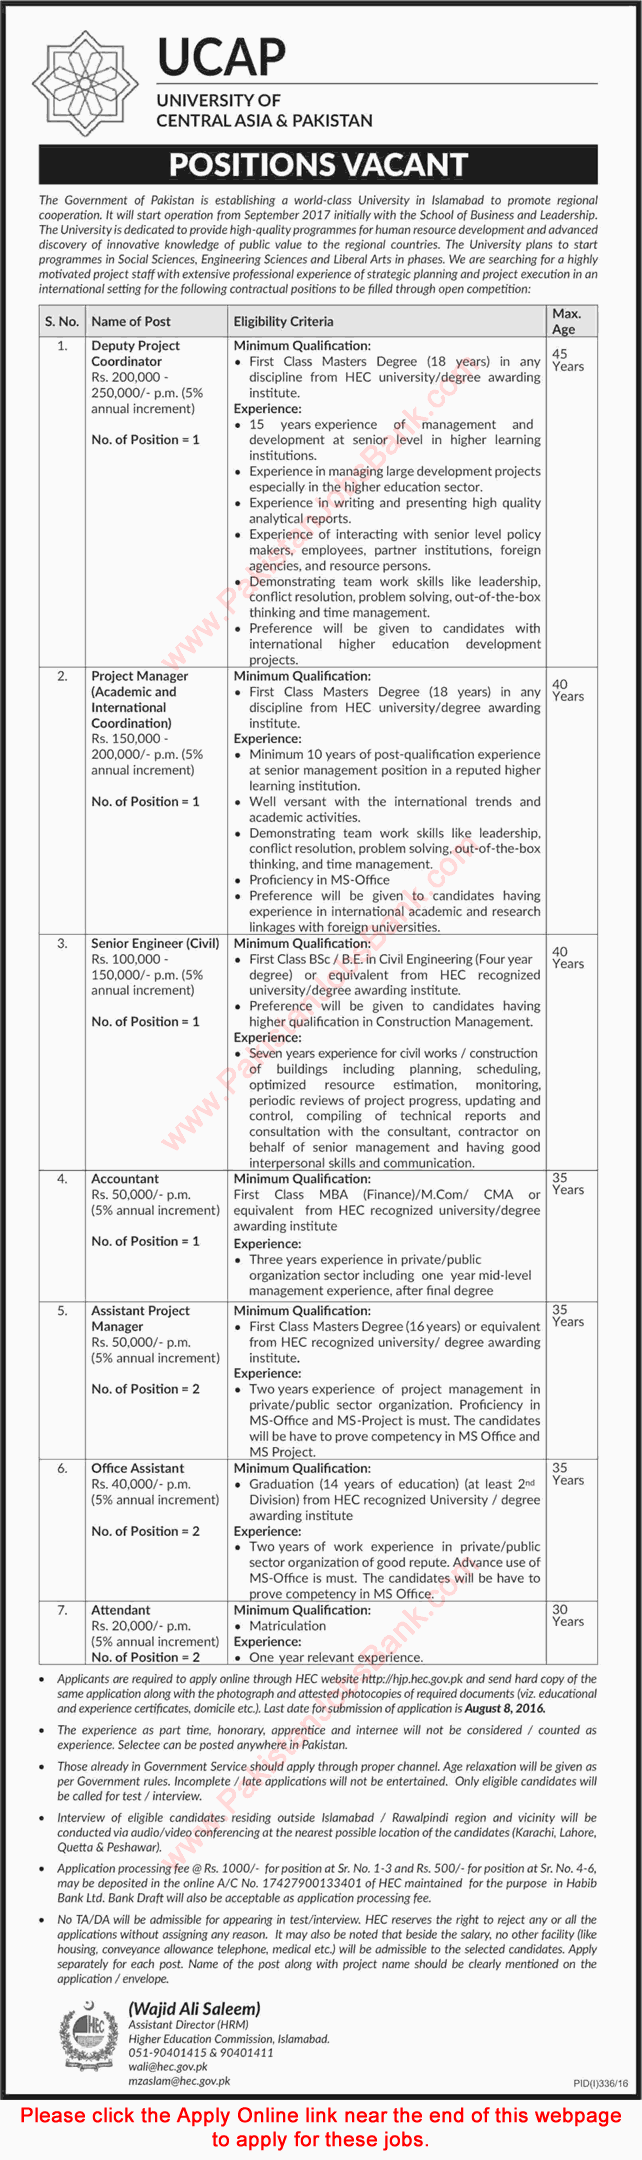 University of Central Asia and Pakistan Islamabad Jobs 2016 July UCAP Apply Online Latest